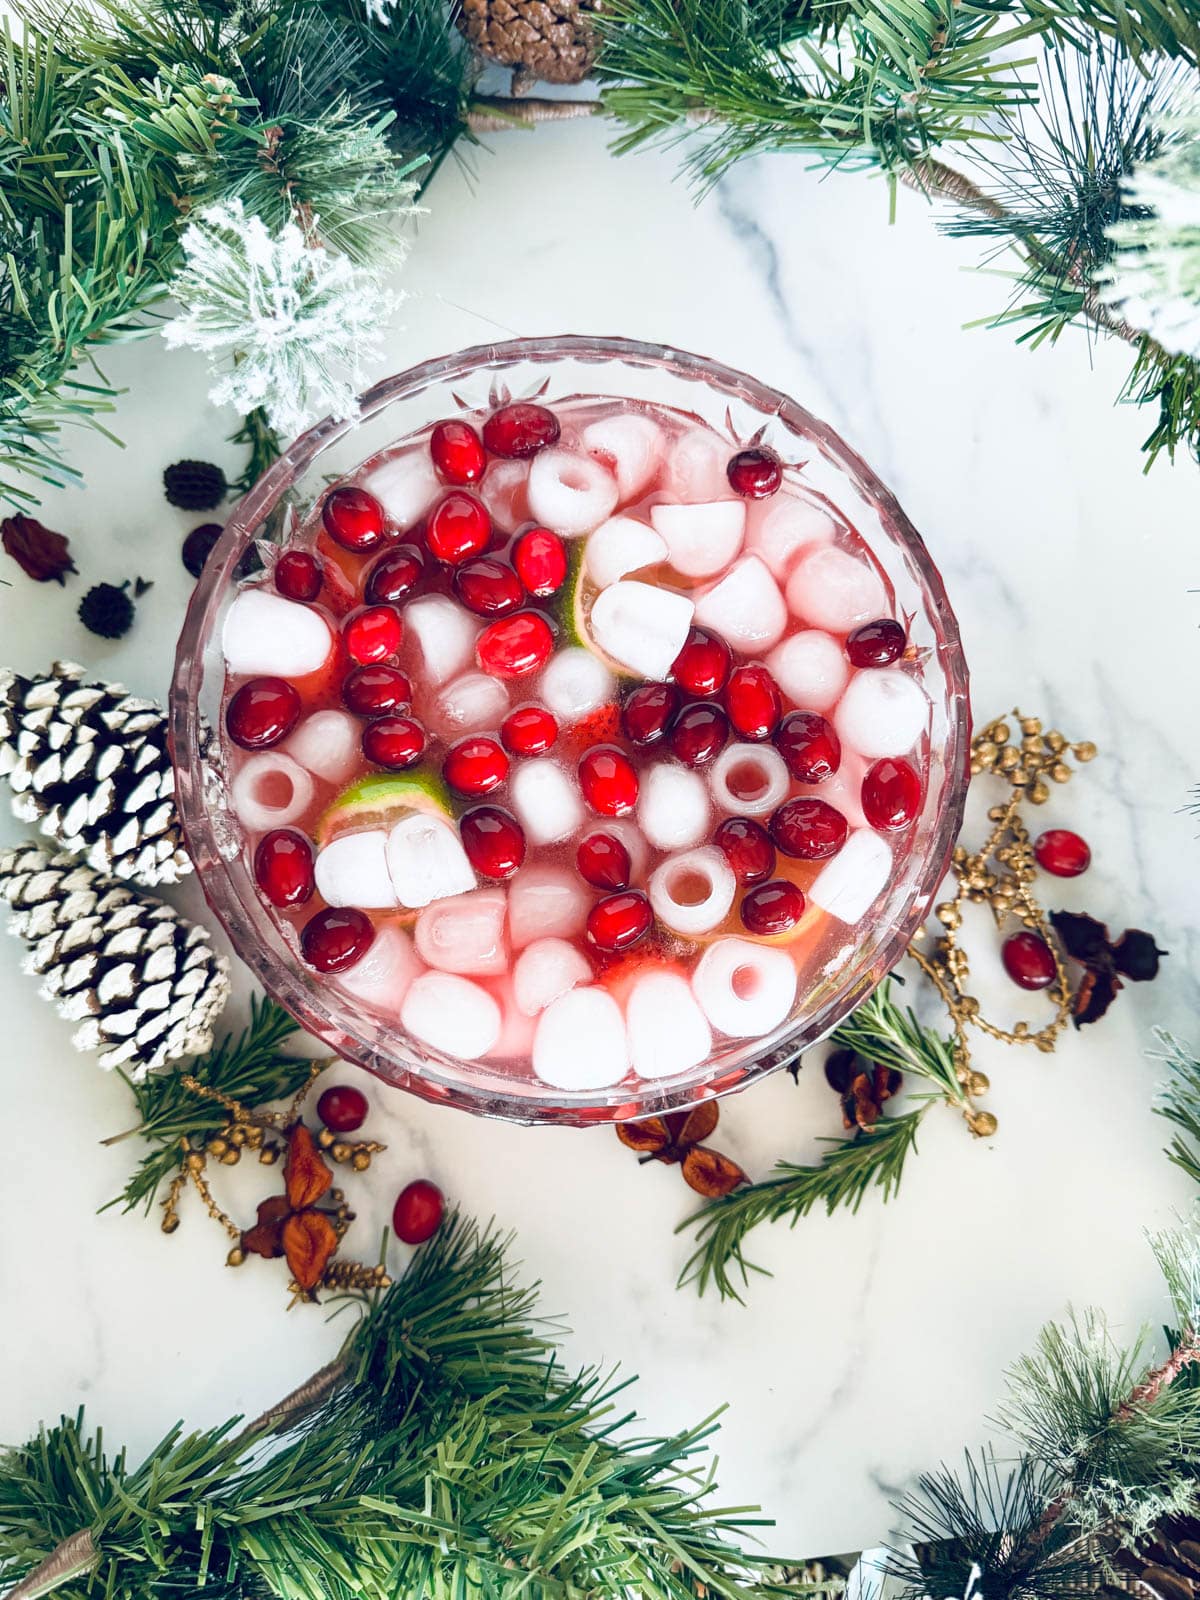 Cranberry and champagne punch with fruit in a glass bowl with Christmas decor.